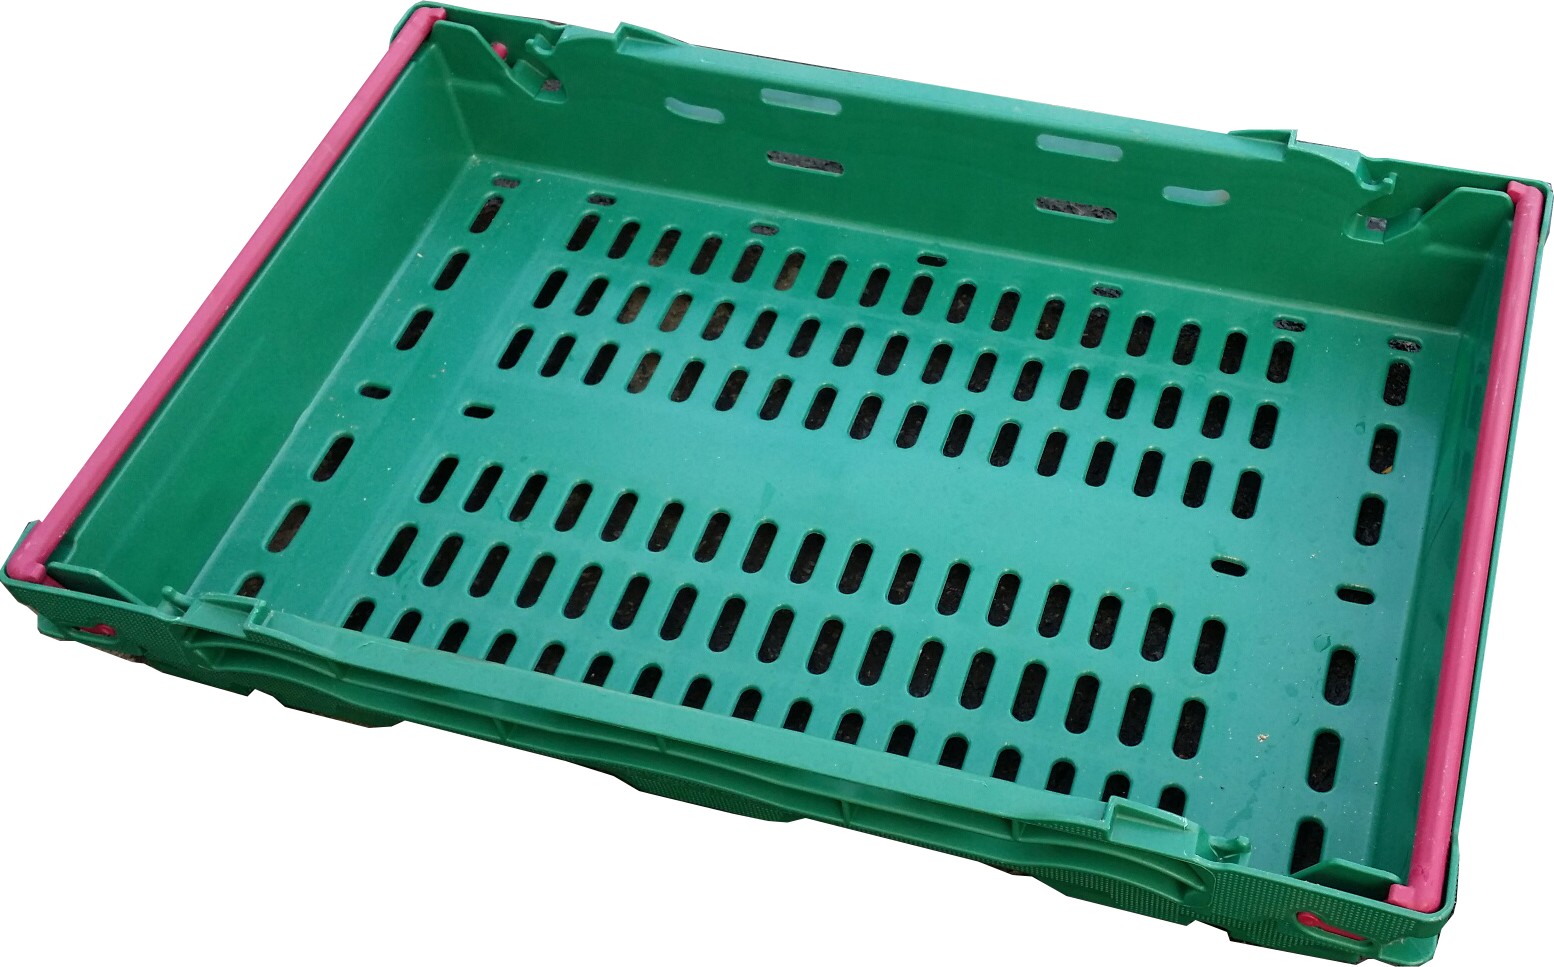 UK Suppliers Of Saeplast 660 Container (628 Ltrs) For Supermarkets